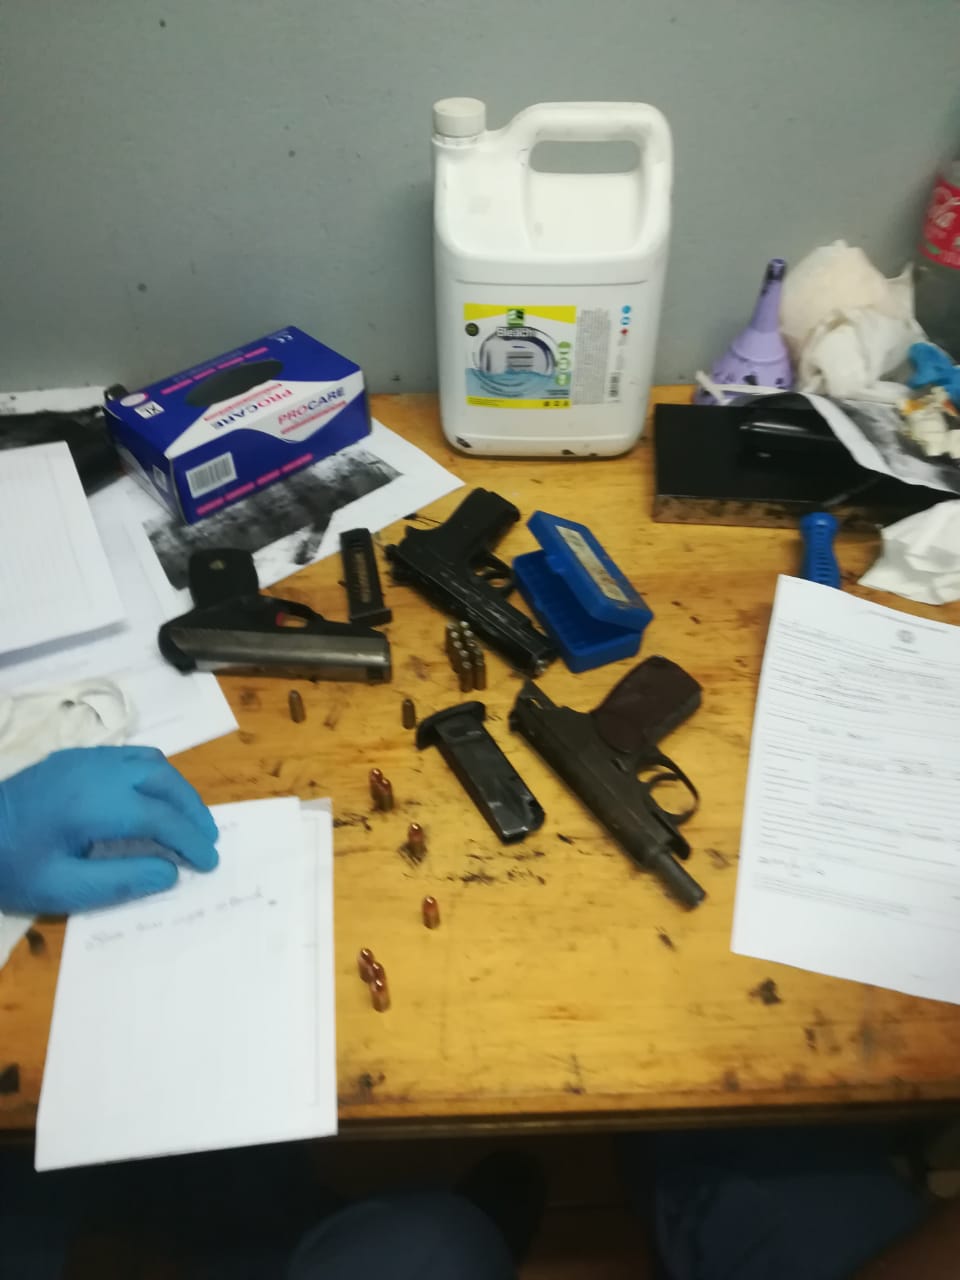 Police arrested three suspects and seized four unlicensed firearms and ammunition